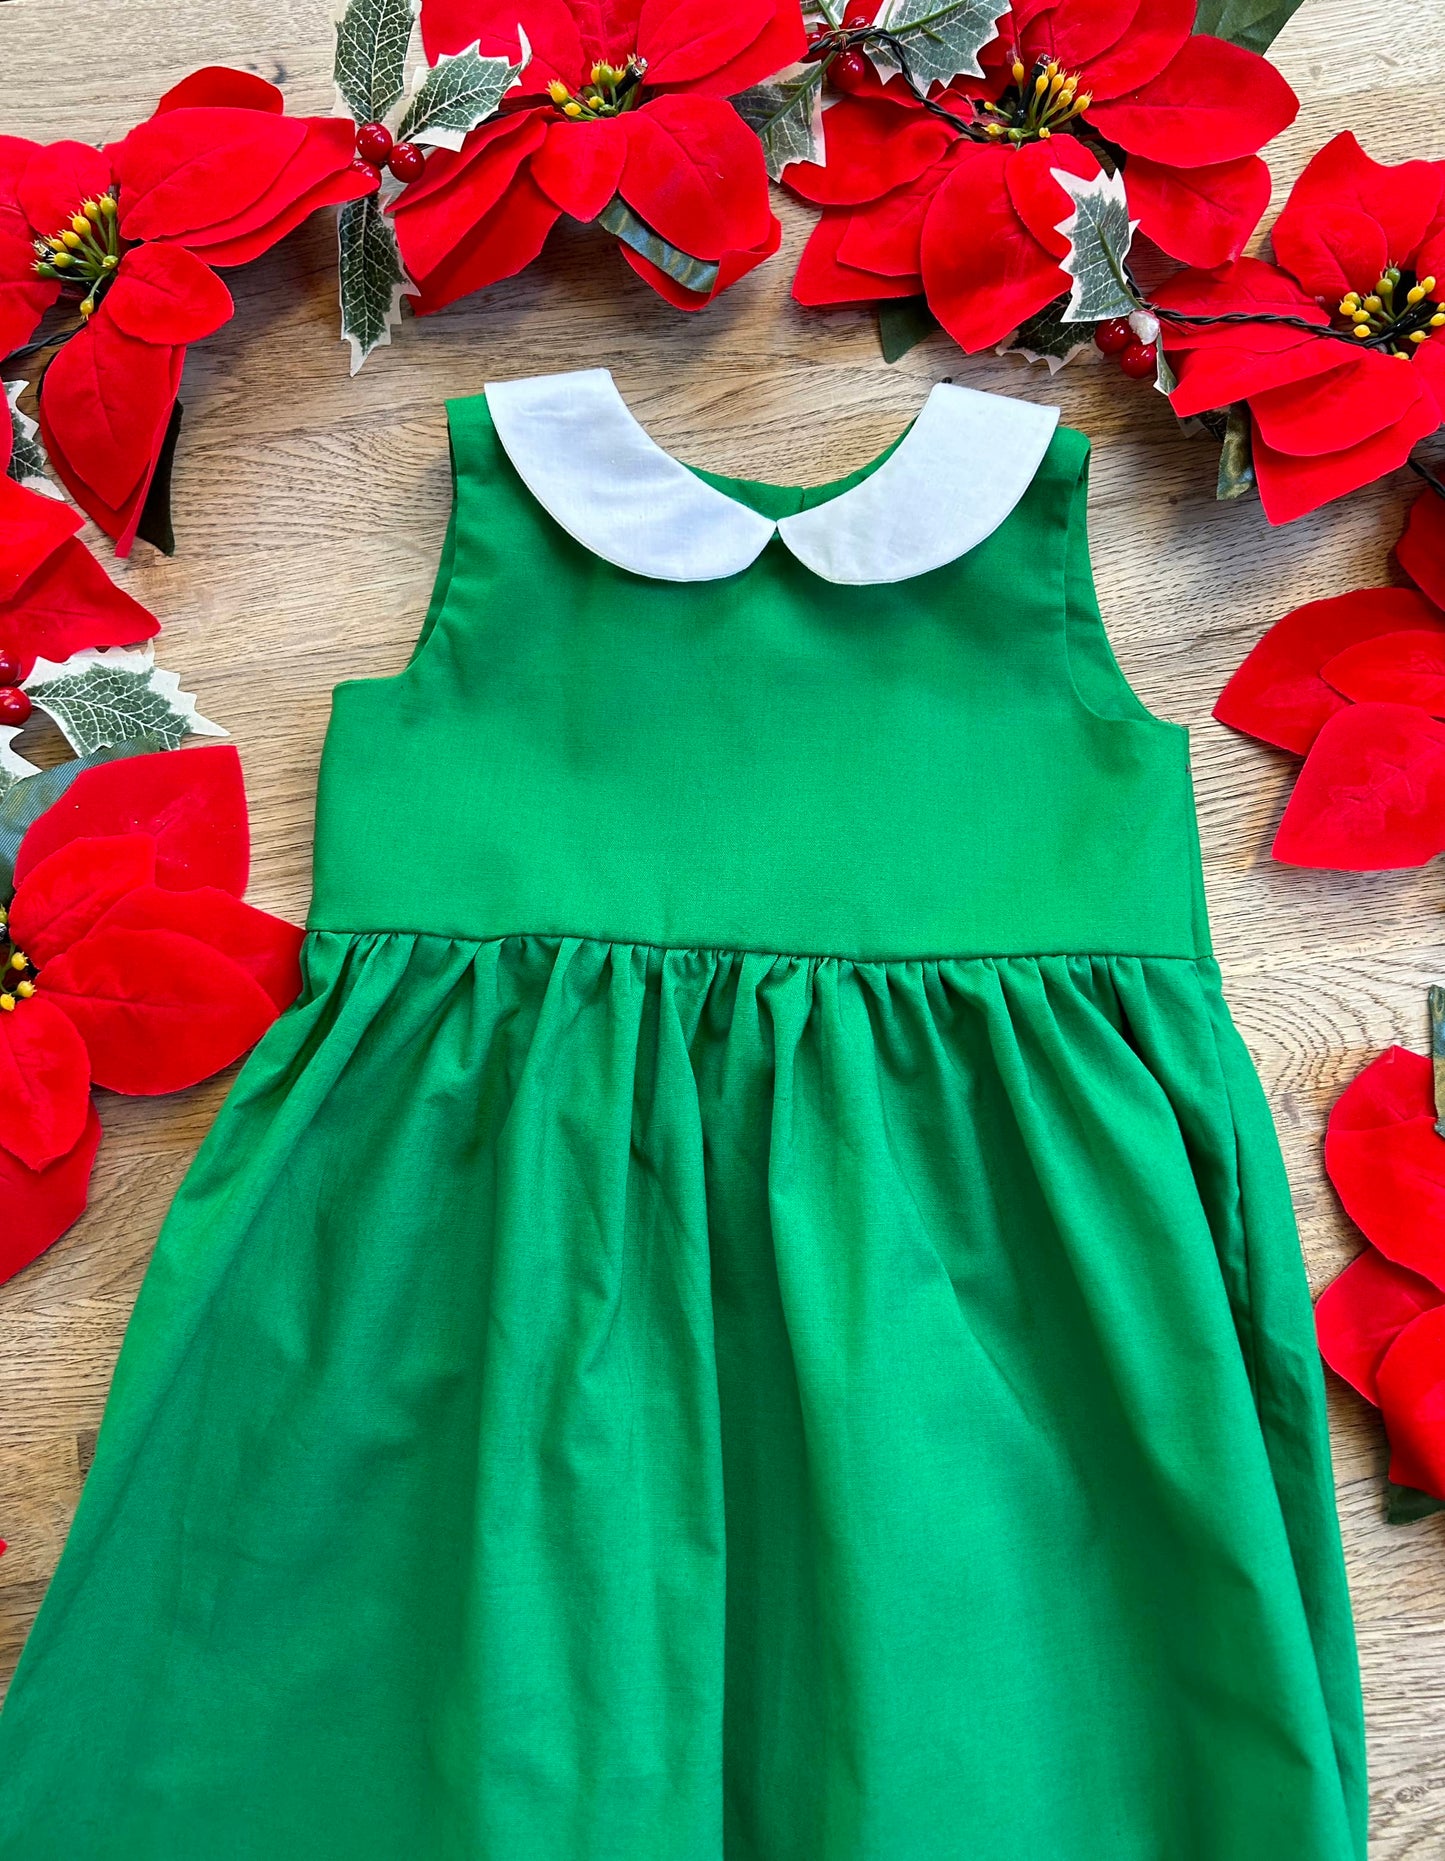 DRESS - Classic Green Dress with Peter Pan Collar (MADE TO ORDER)